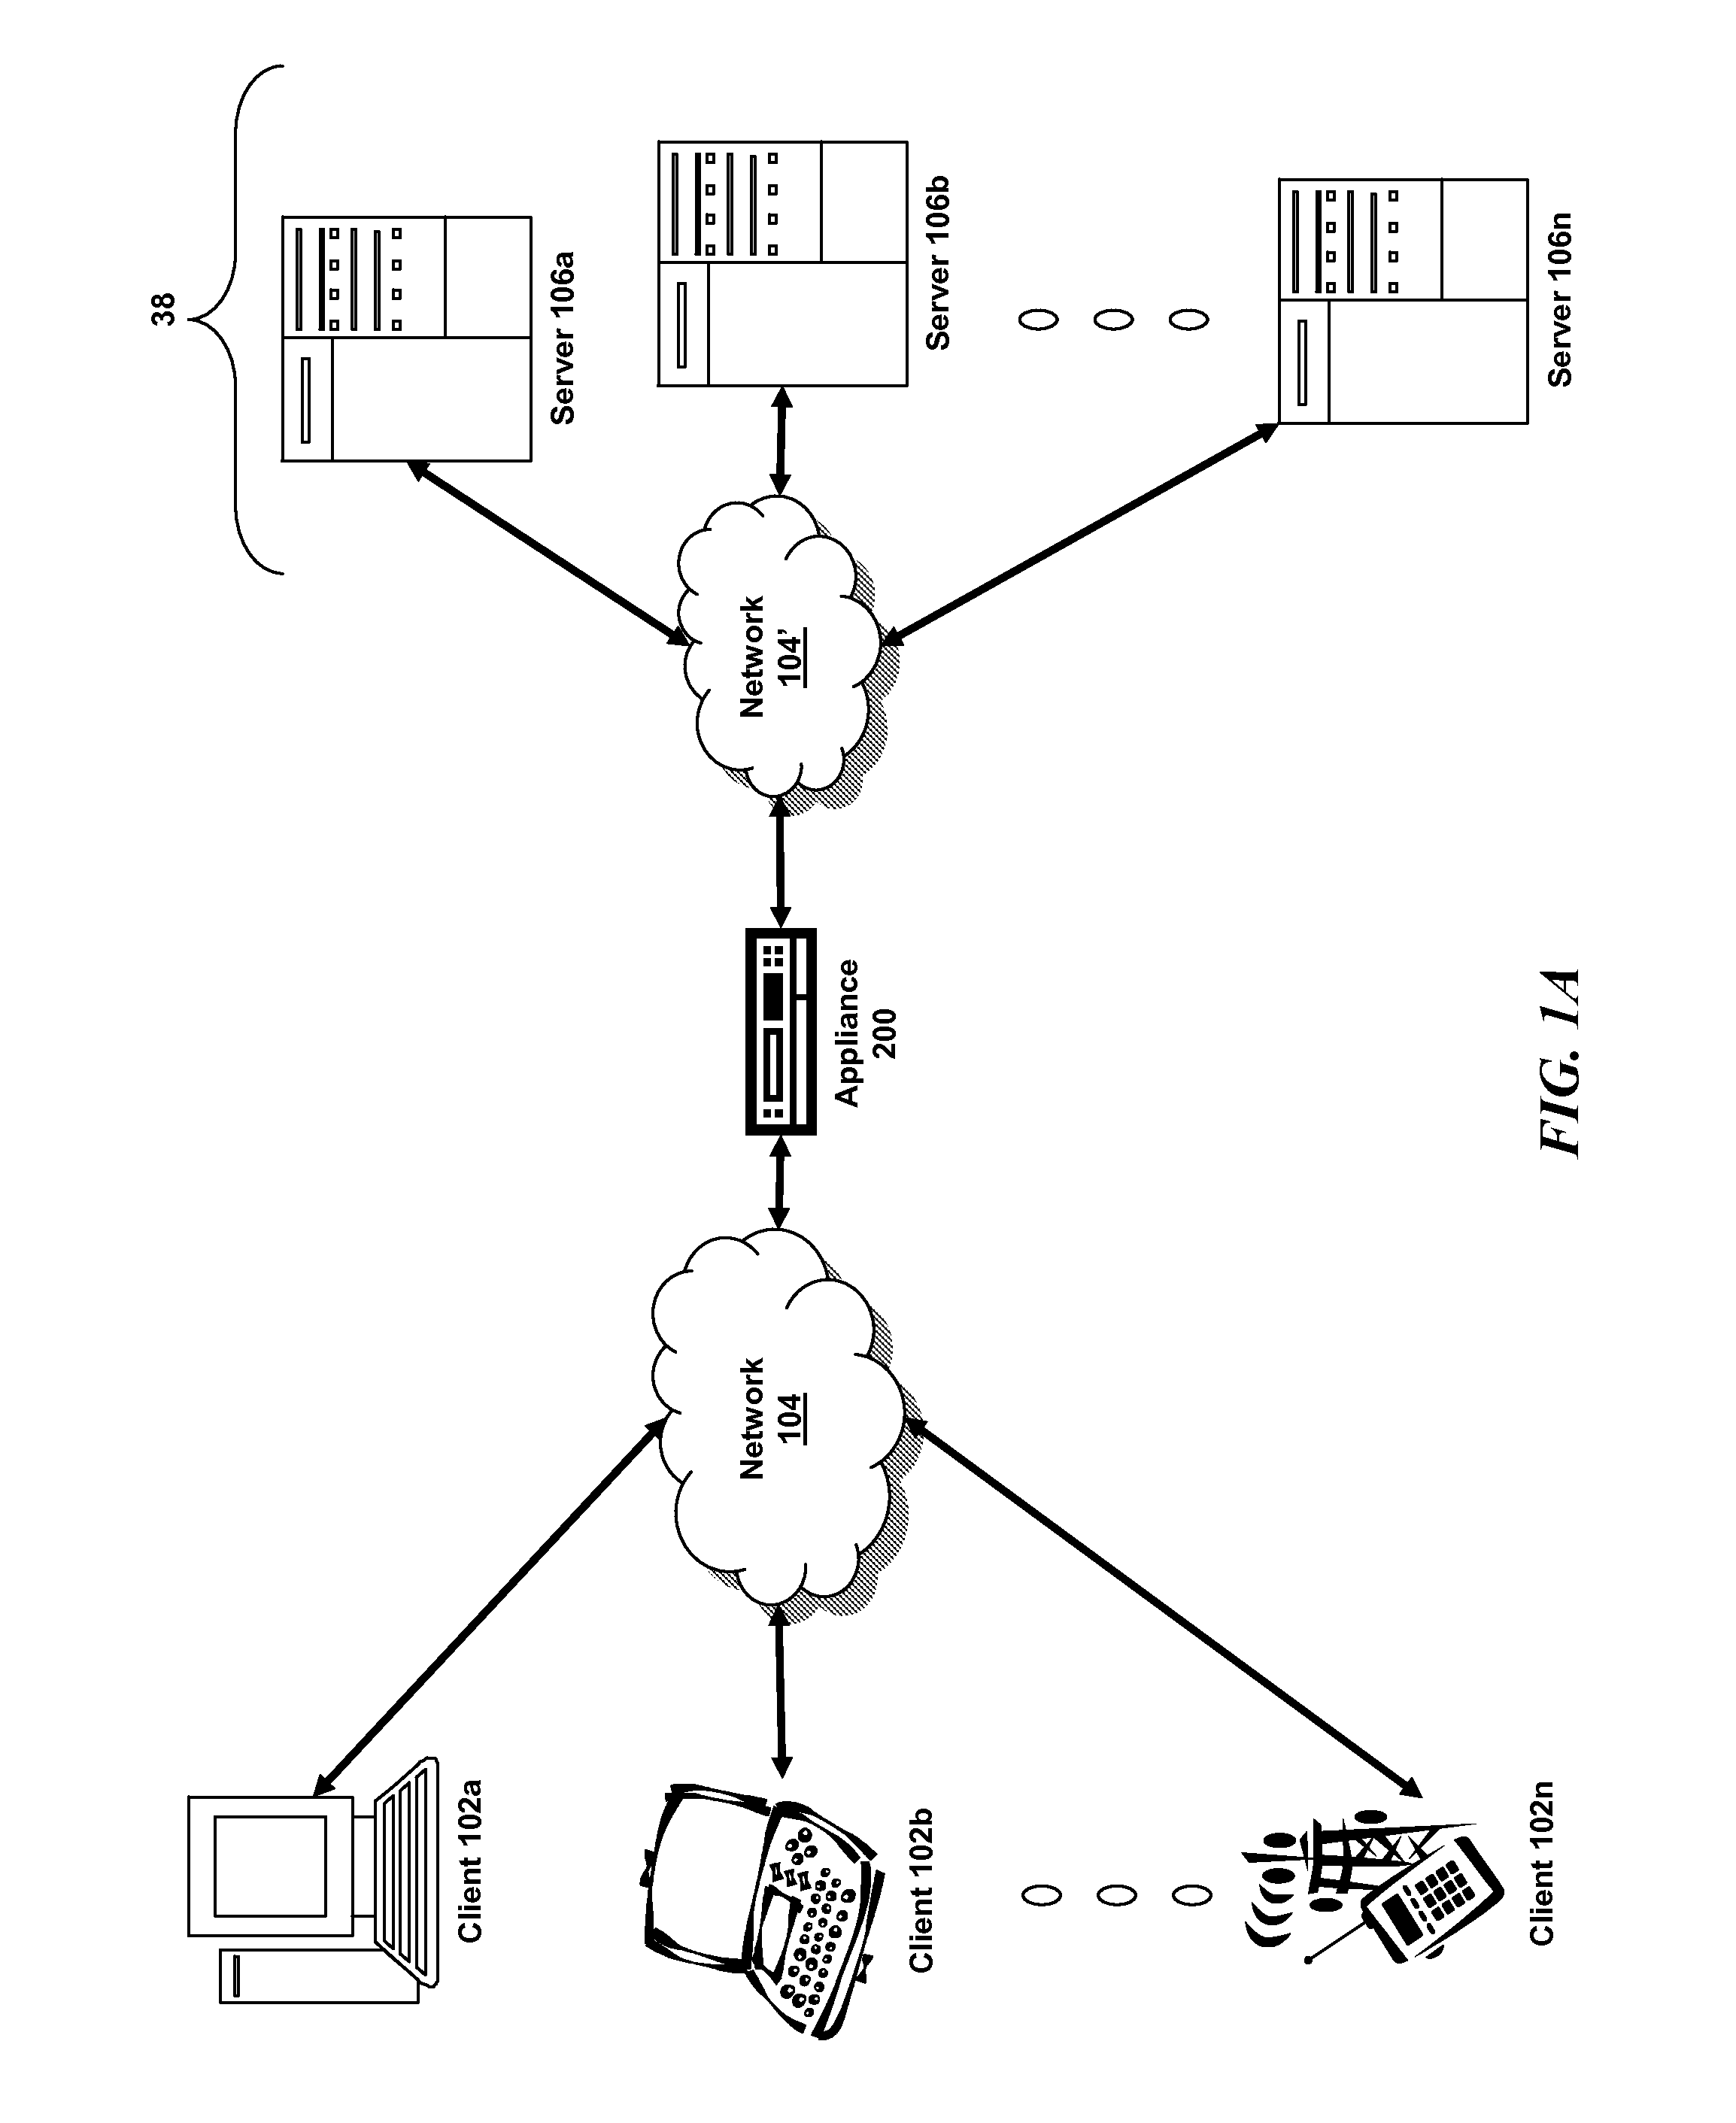 Systems and methods for spillover in a multi-core system